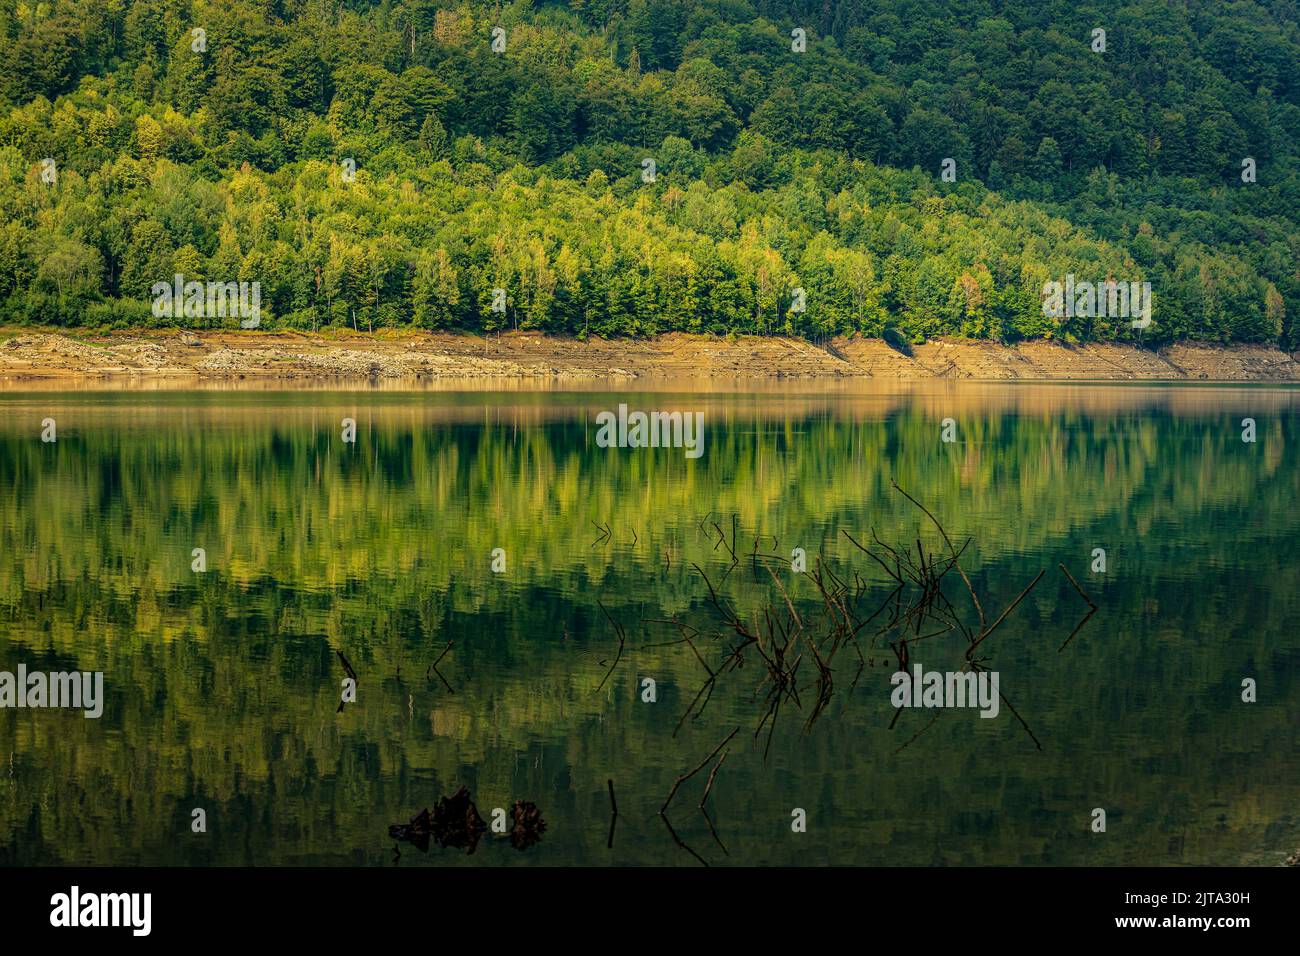 The Poiana Marului Lake shore reflected in a symmetry during summer. Photo taken on 31st of July 2022 in Poiana Marului reservation, Caras-Severin Cou Stock Photo